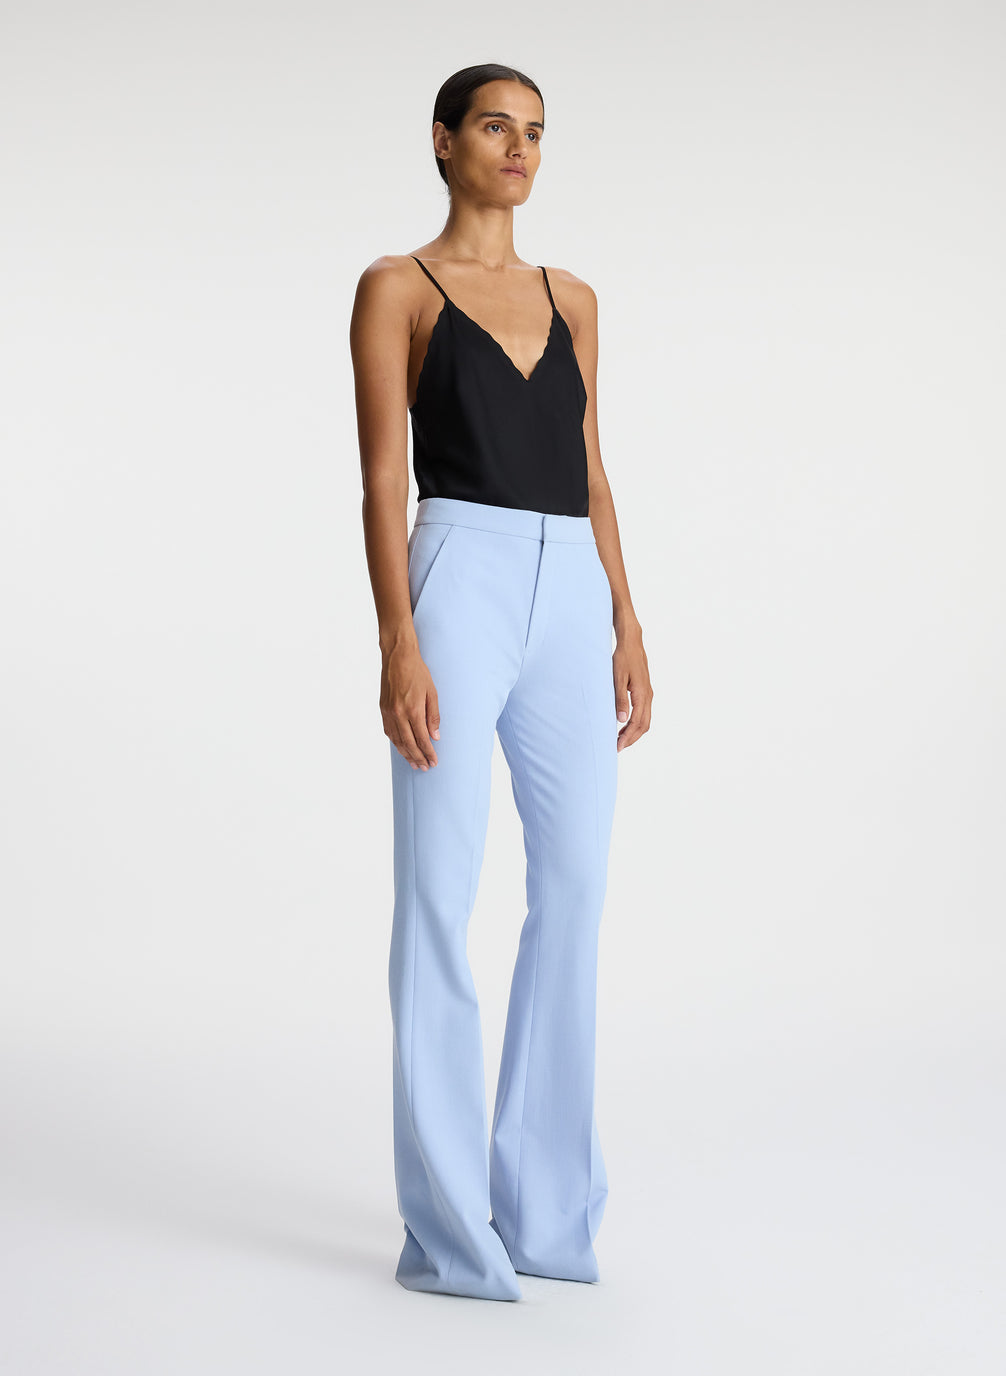 side view of woman wearing black satin camisole with light blue pants